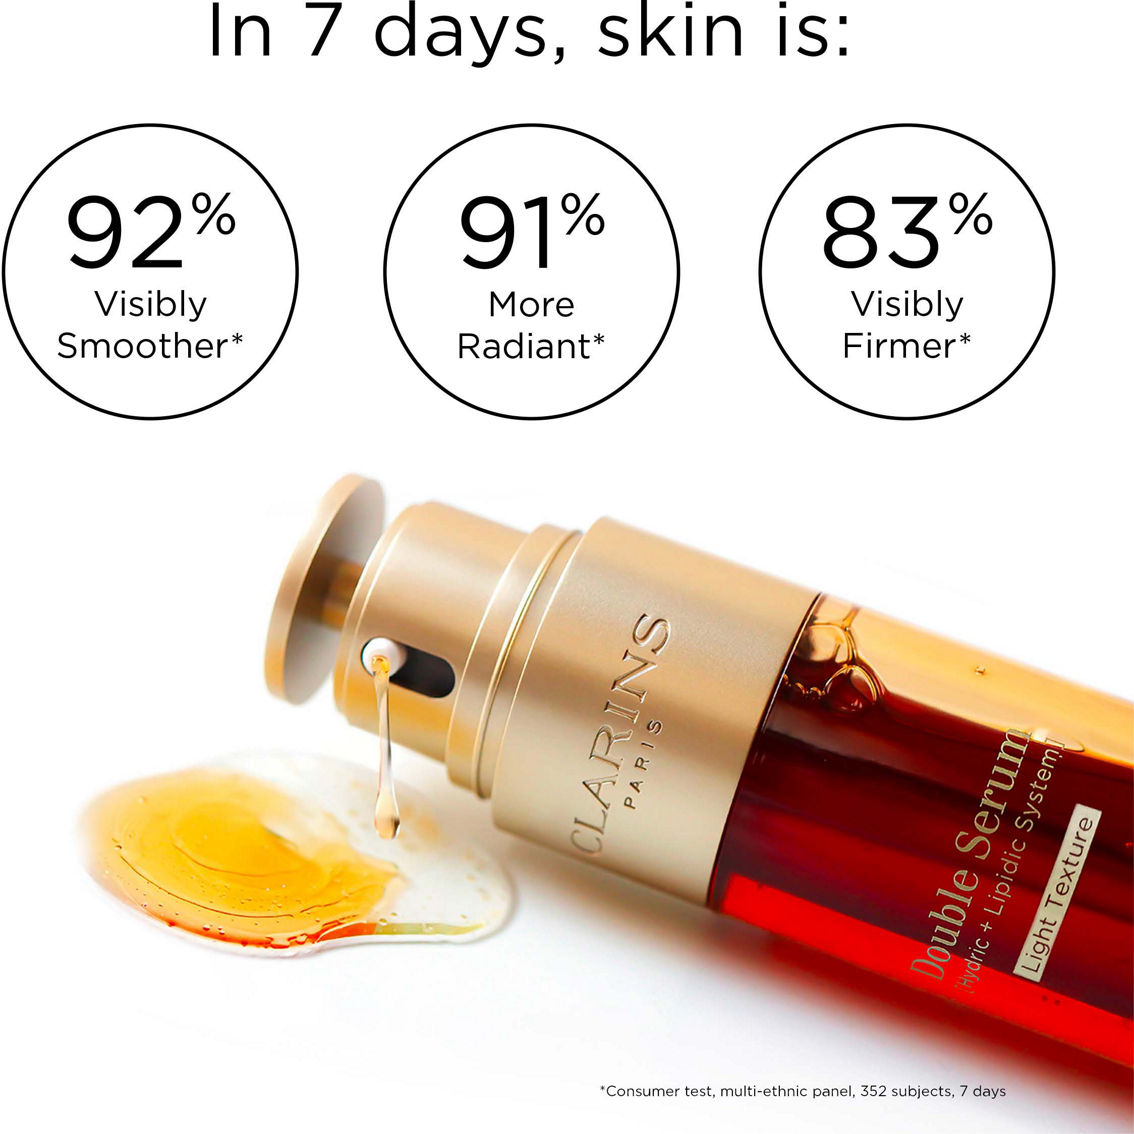 CLARINS Double Serum Light Texture Firming and Smoothing Anti Aging Concentrate - Image 2 of 2